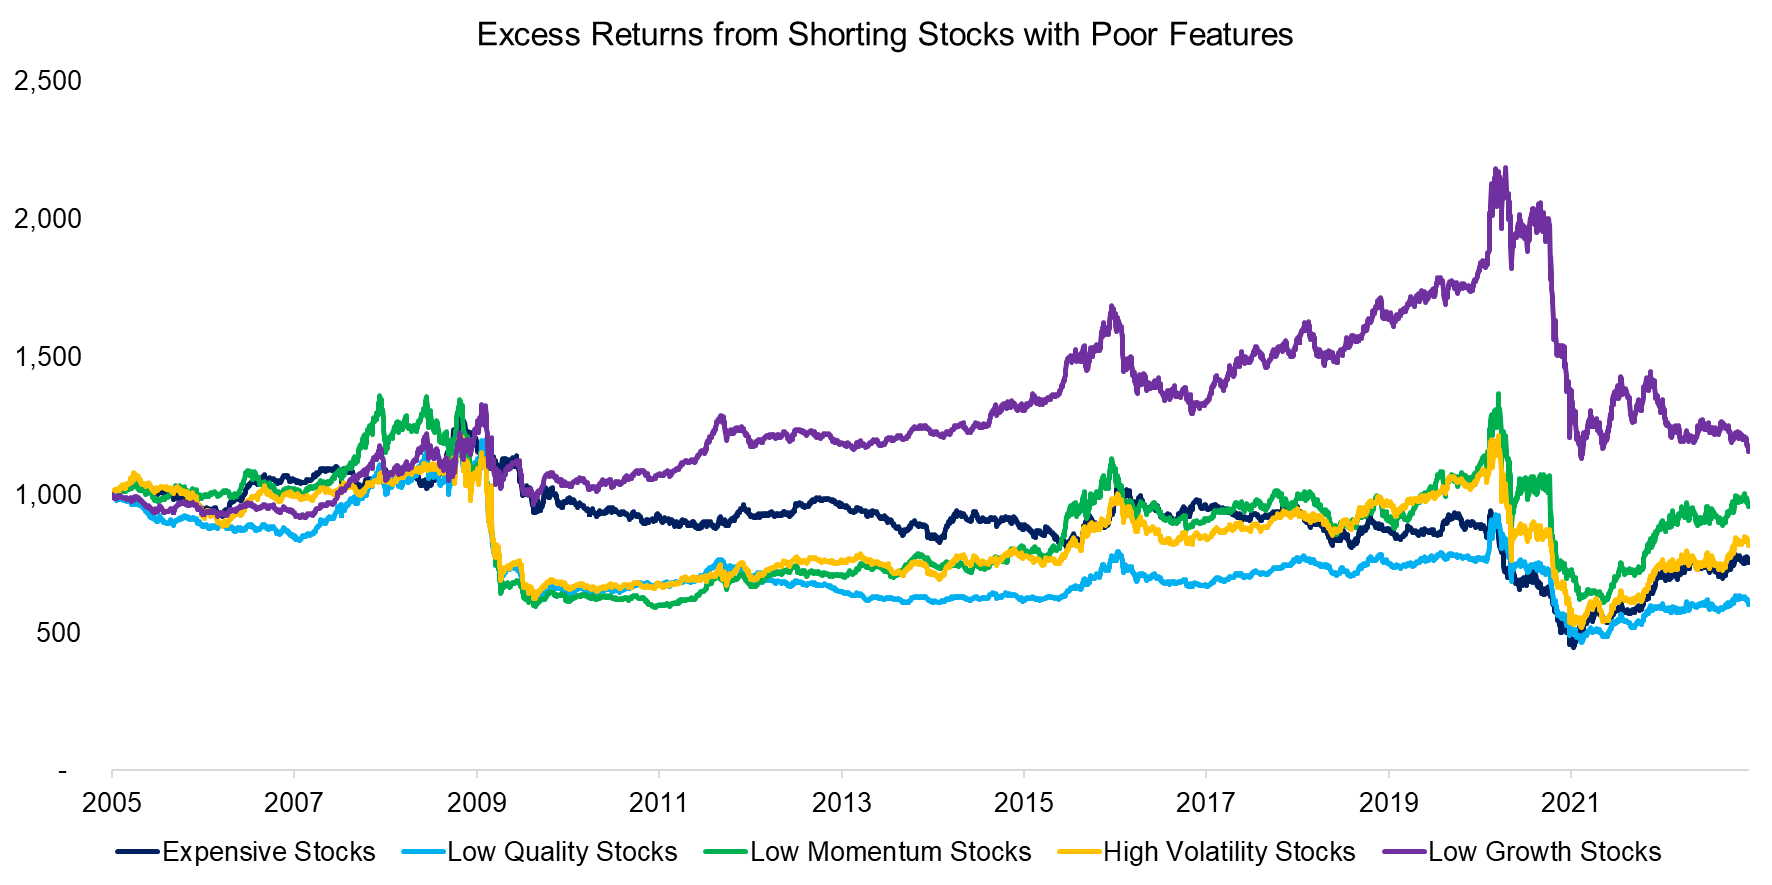 Excess Returns from Shorting Stocks with Poor Features